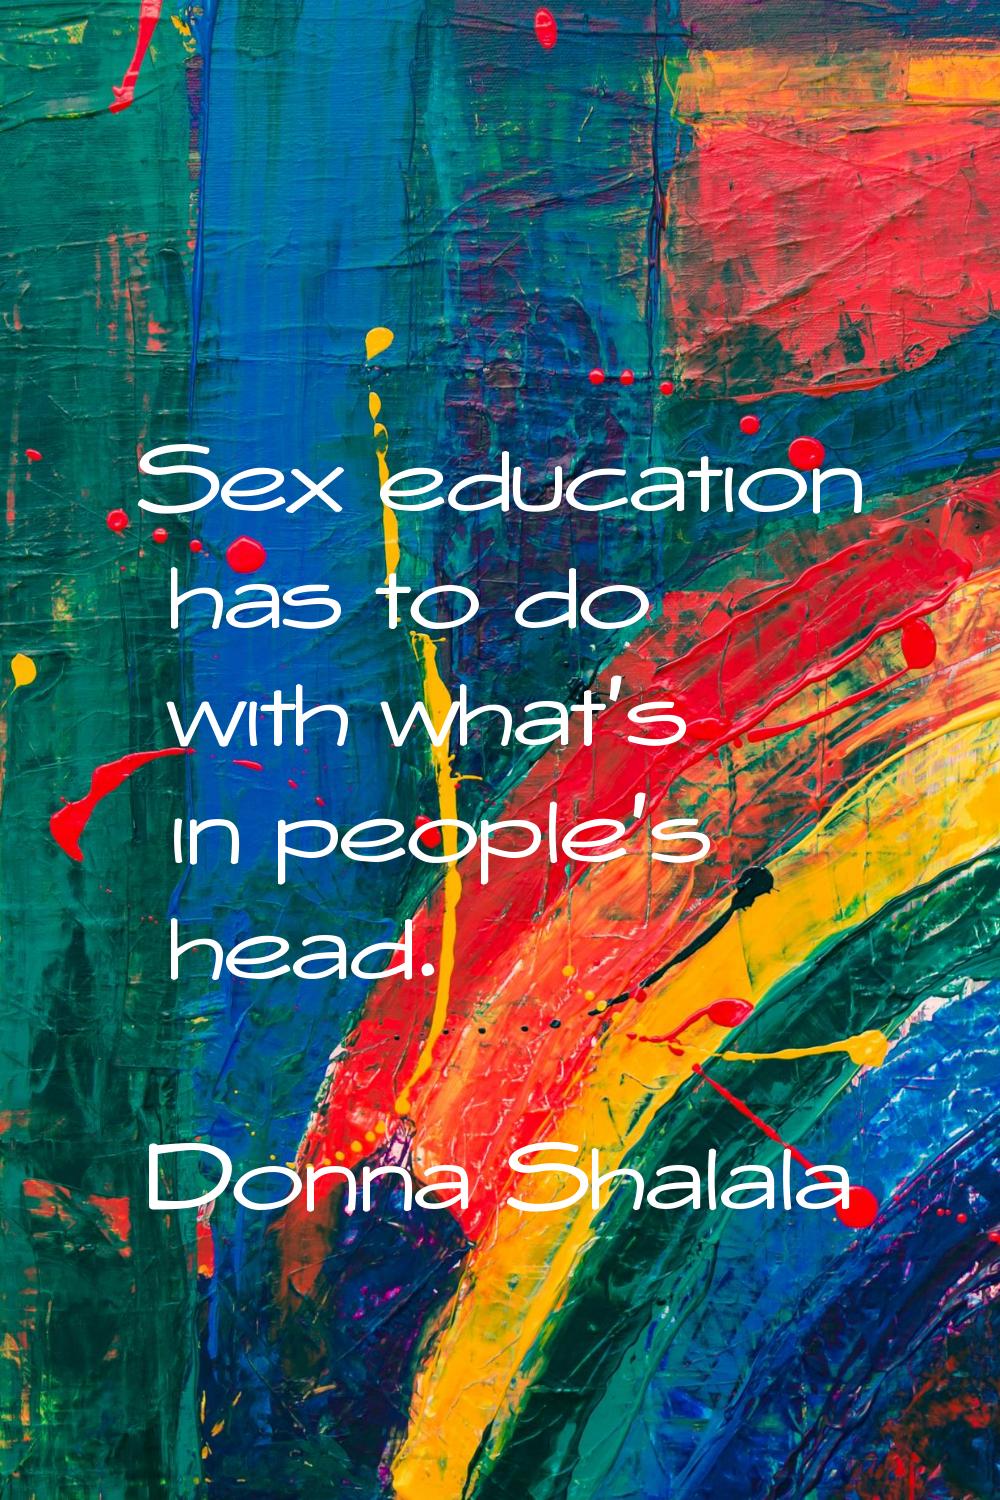 Sex education has to do with what's in people's head.